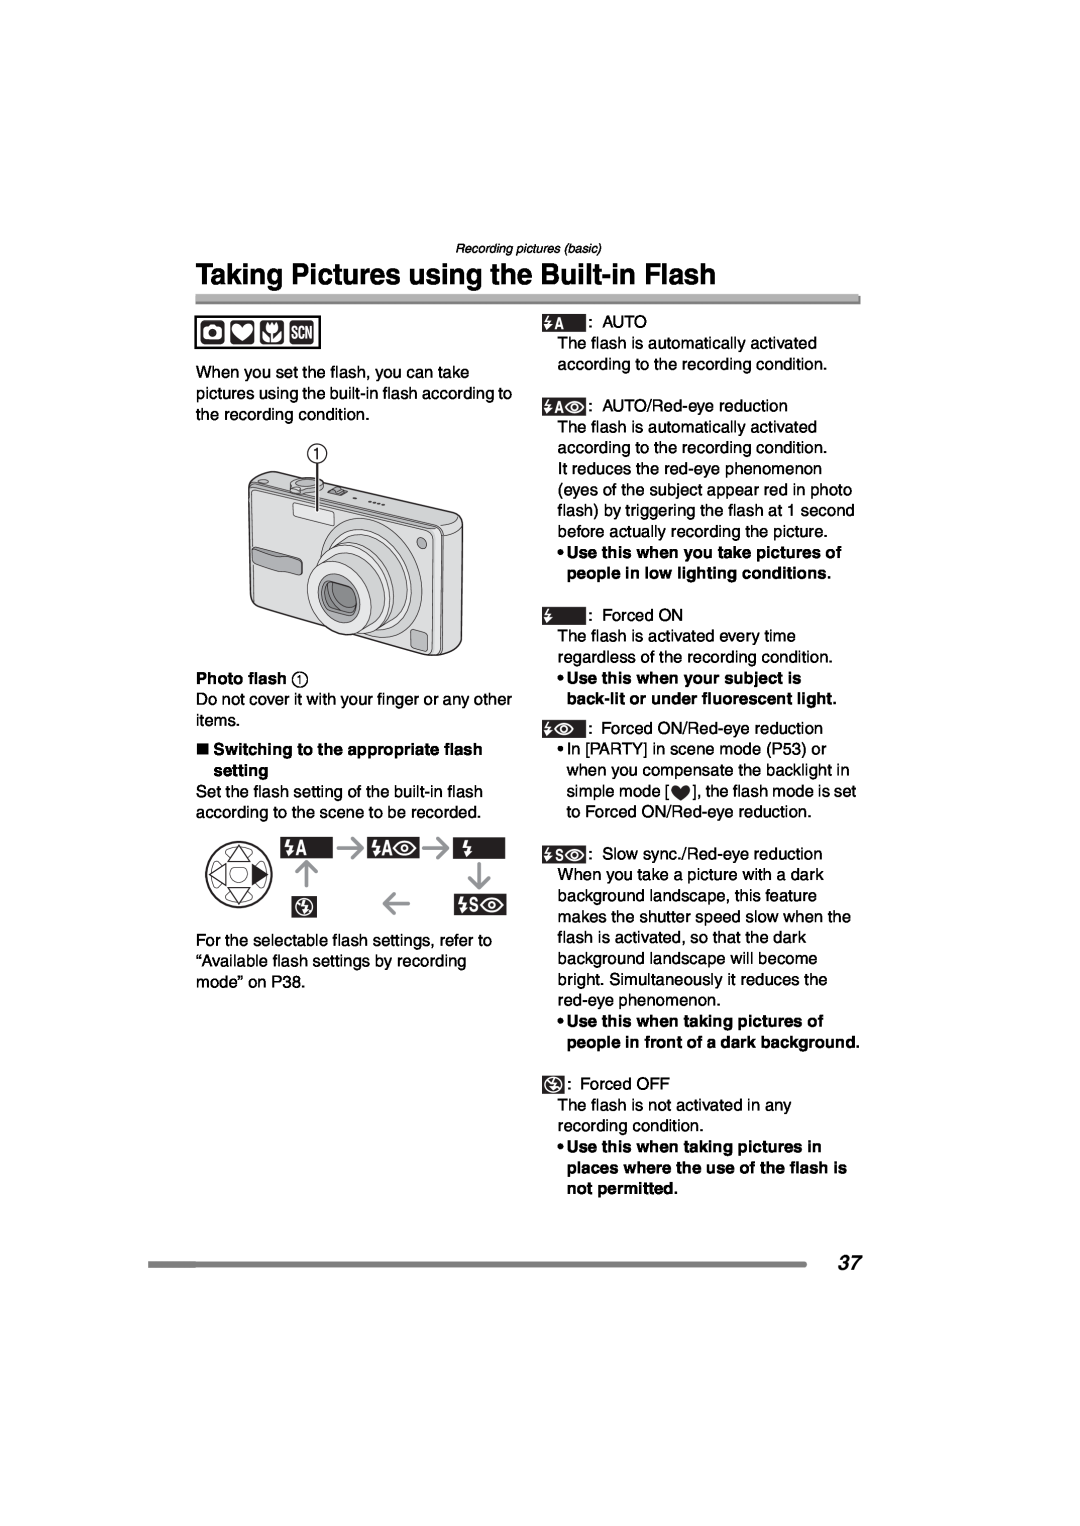 Panasonic DMCFX7K Taking Pictures using the Built-in Flash, Photo flash, ∫ Switching to the appropriate flash setting 